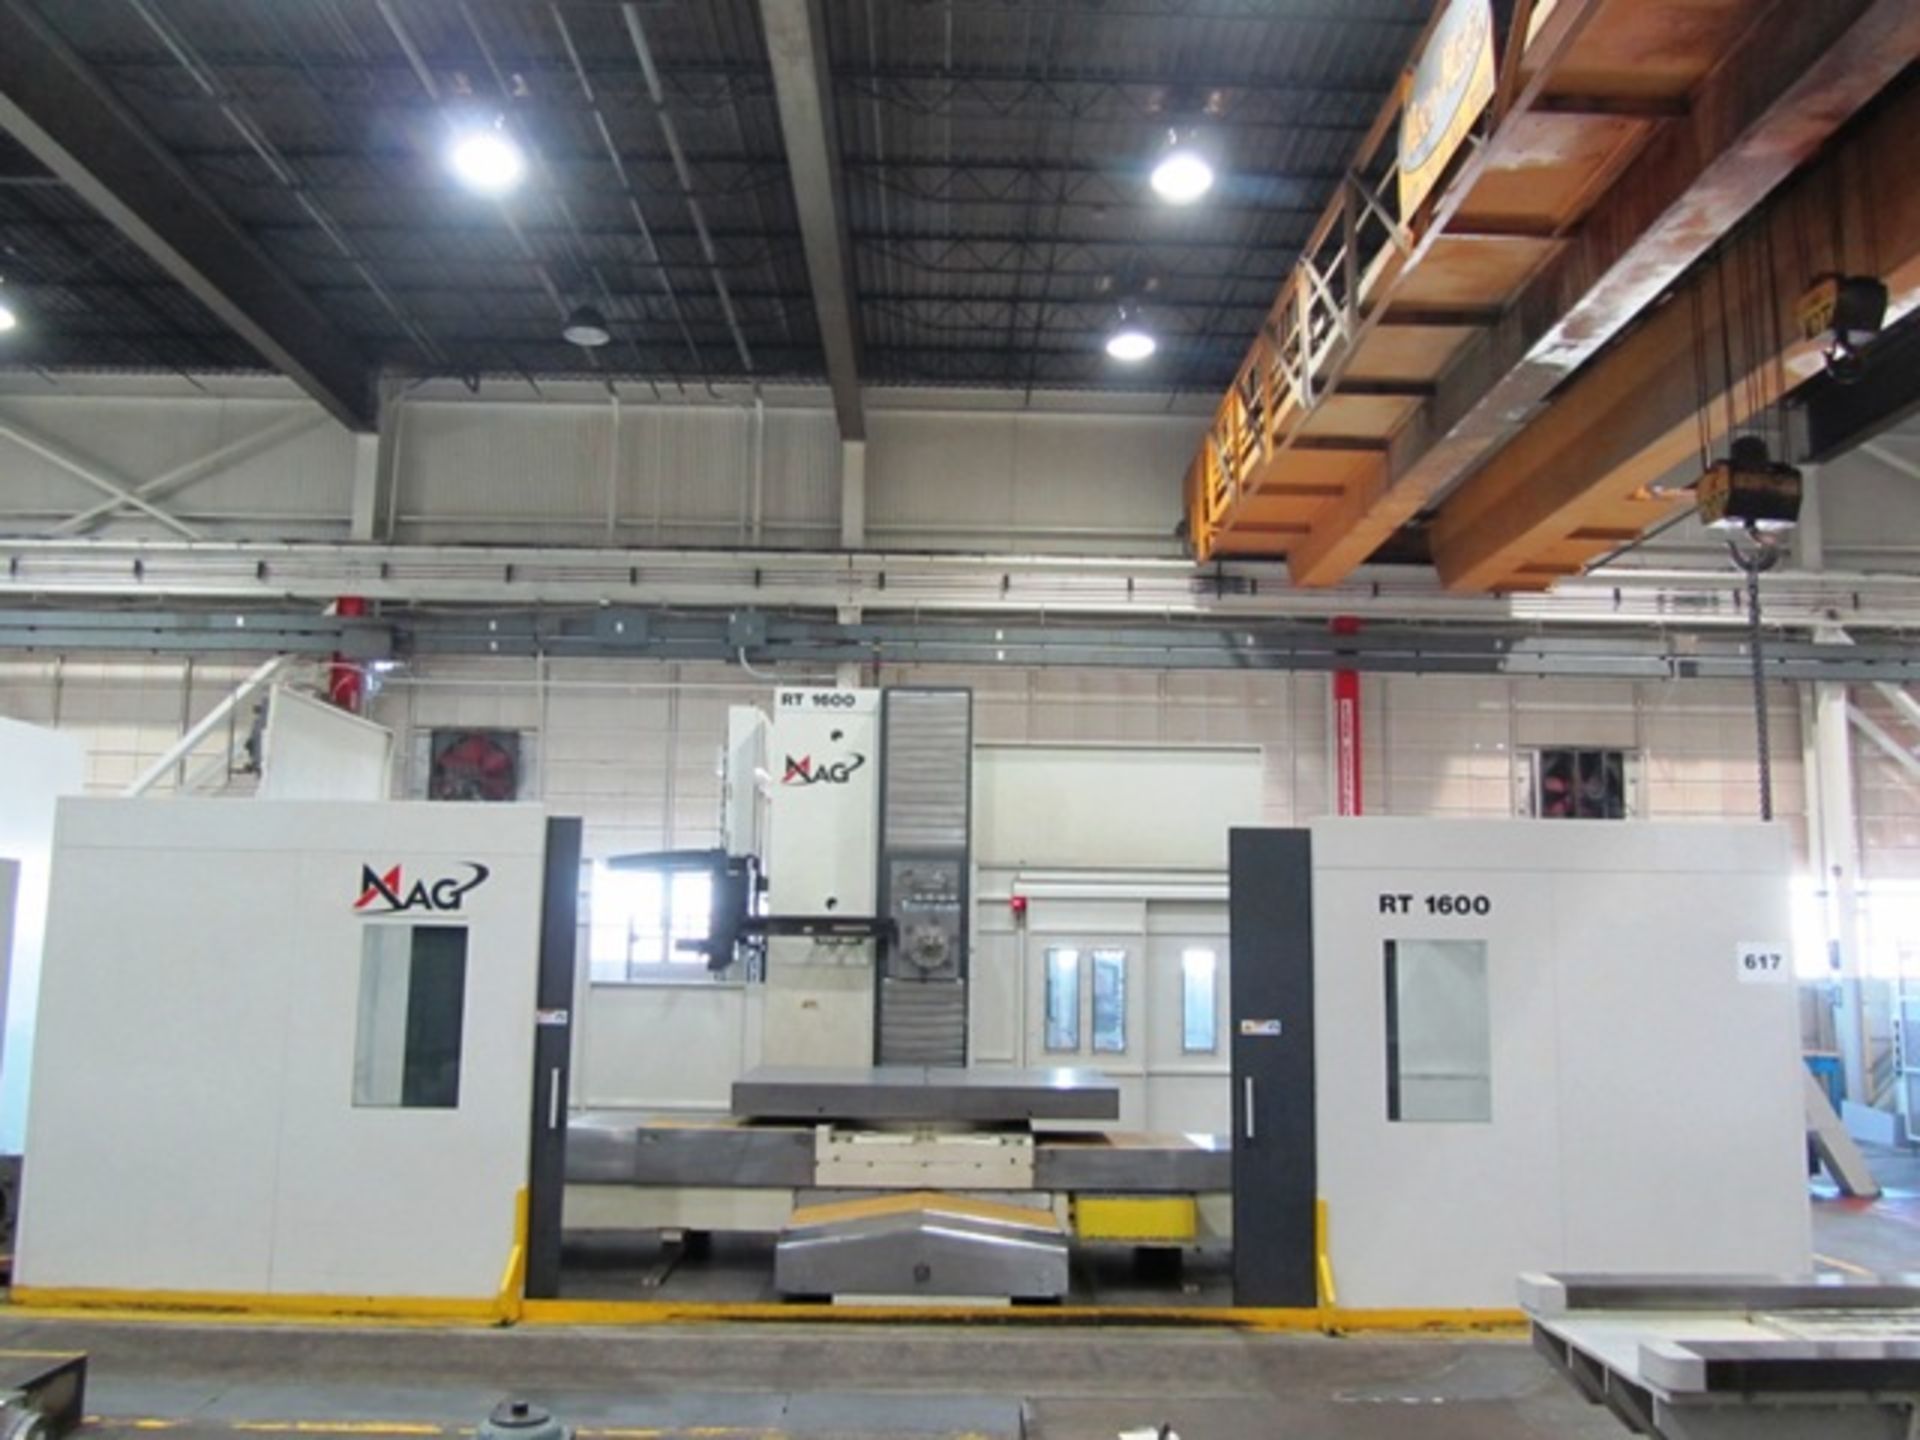 Giddings & Lewis Model RT 1600 6.1'' CNC Table Type Horizontal Boring Mill with 63'' x 98.4'' B-Axis - Image 3 of 4